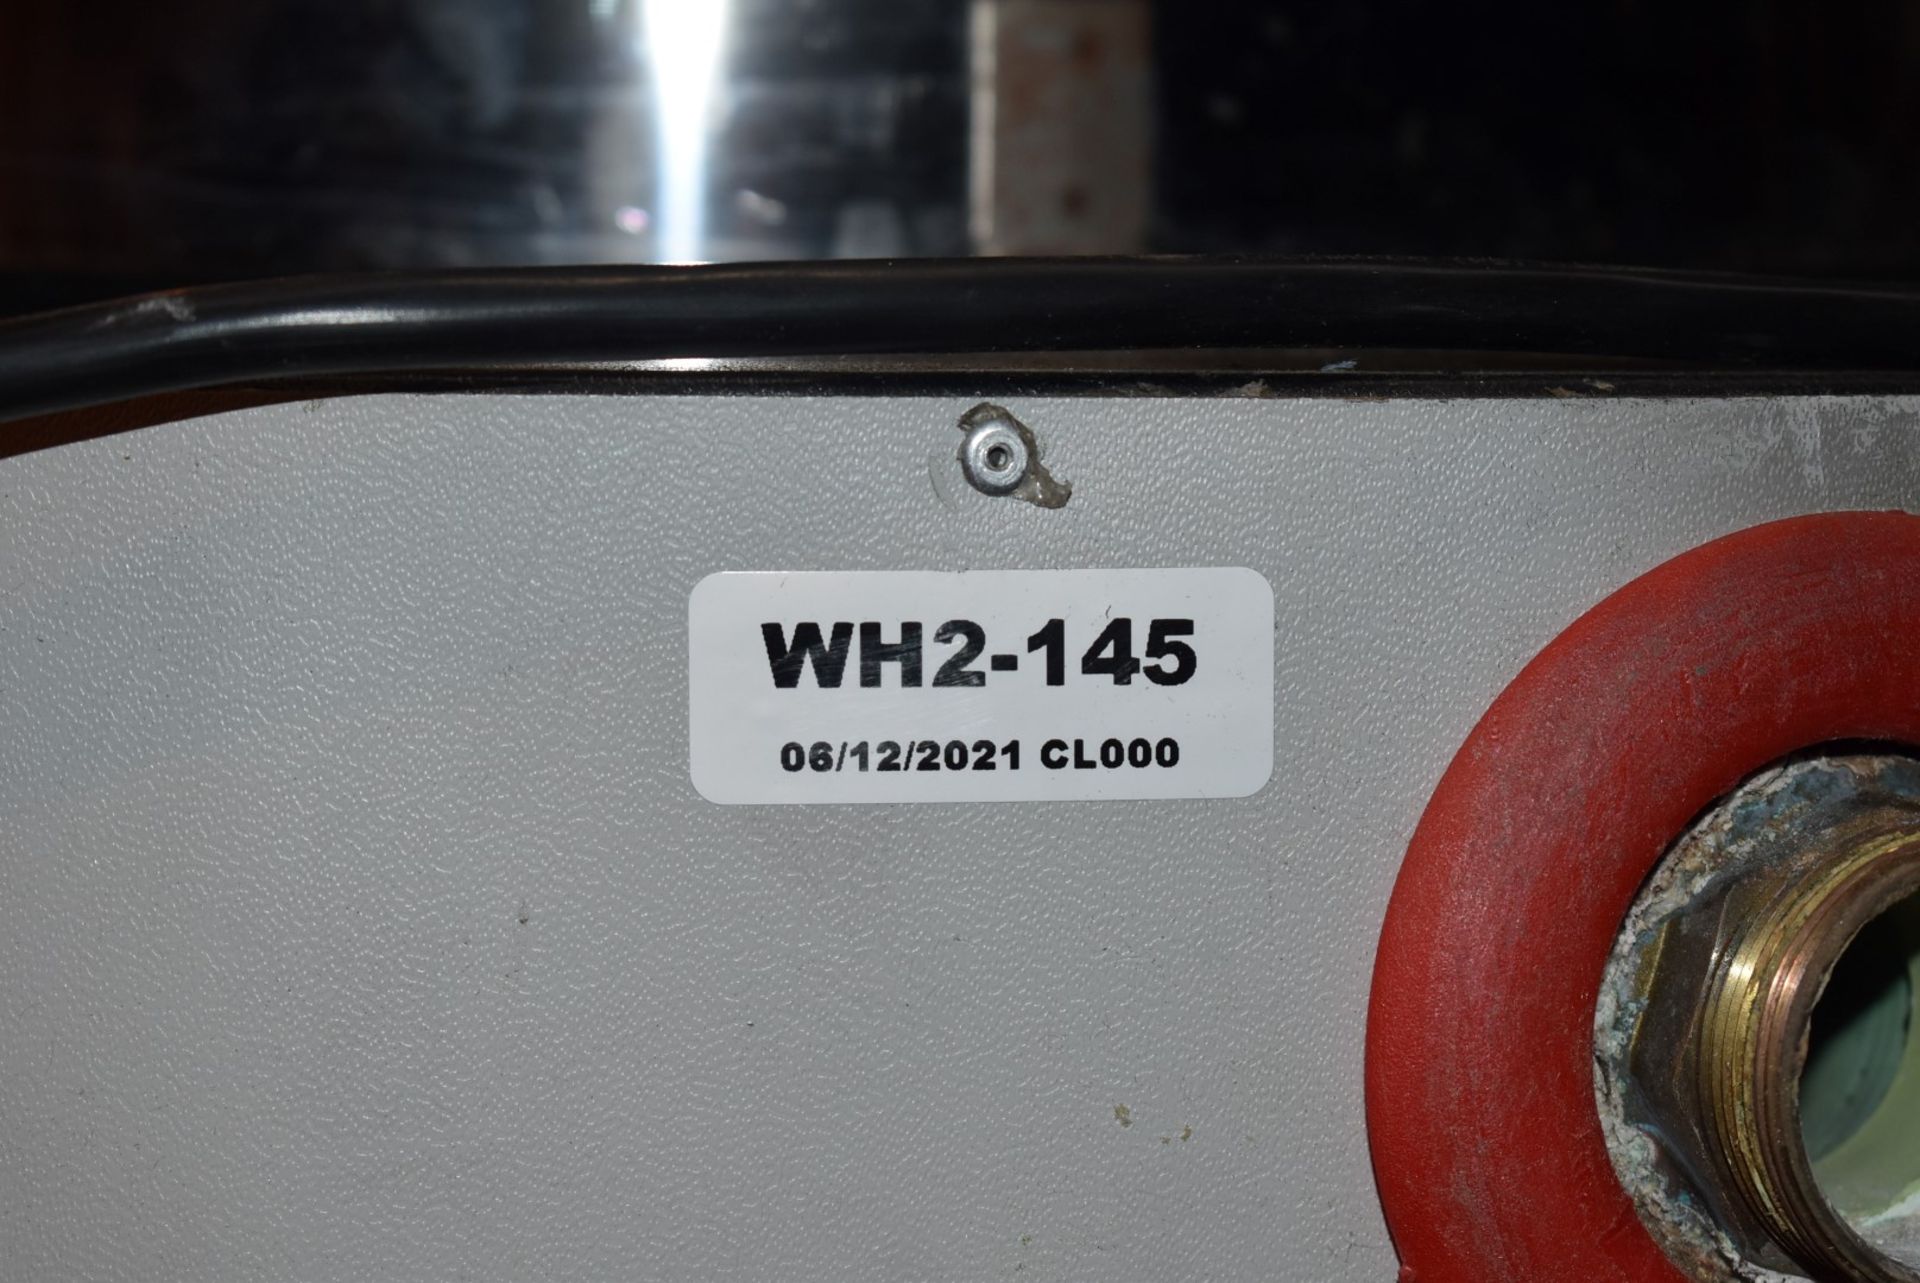 1 x Lochinvar High Efficiency Gas Fired 220L Storage Water Heater - Model LBF-220 - Ref: WH2-145 H5D - Image 14 of 14